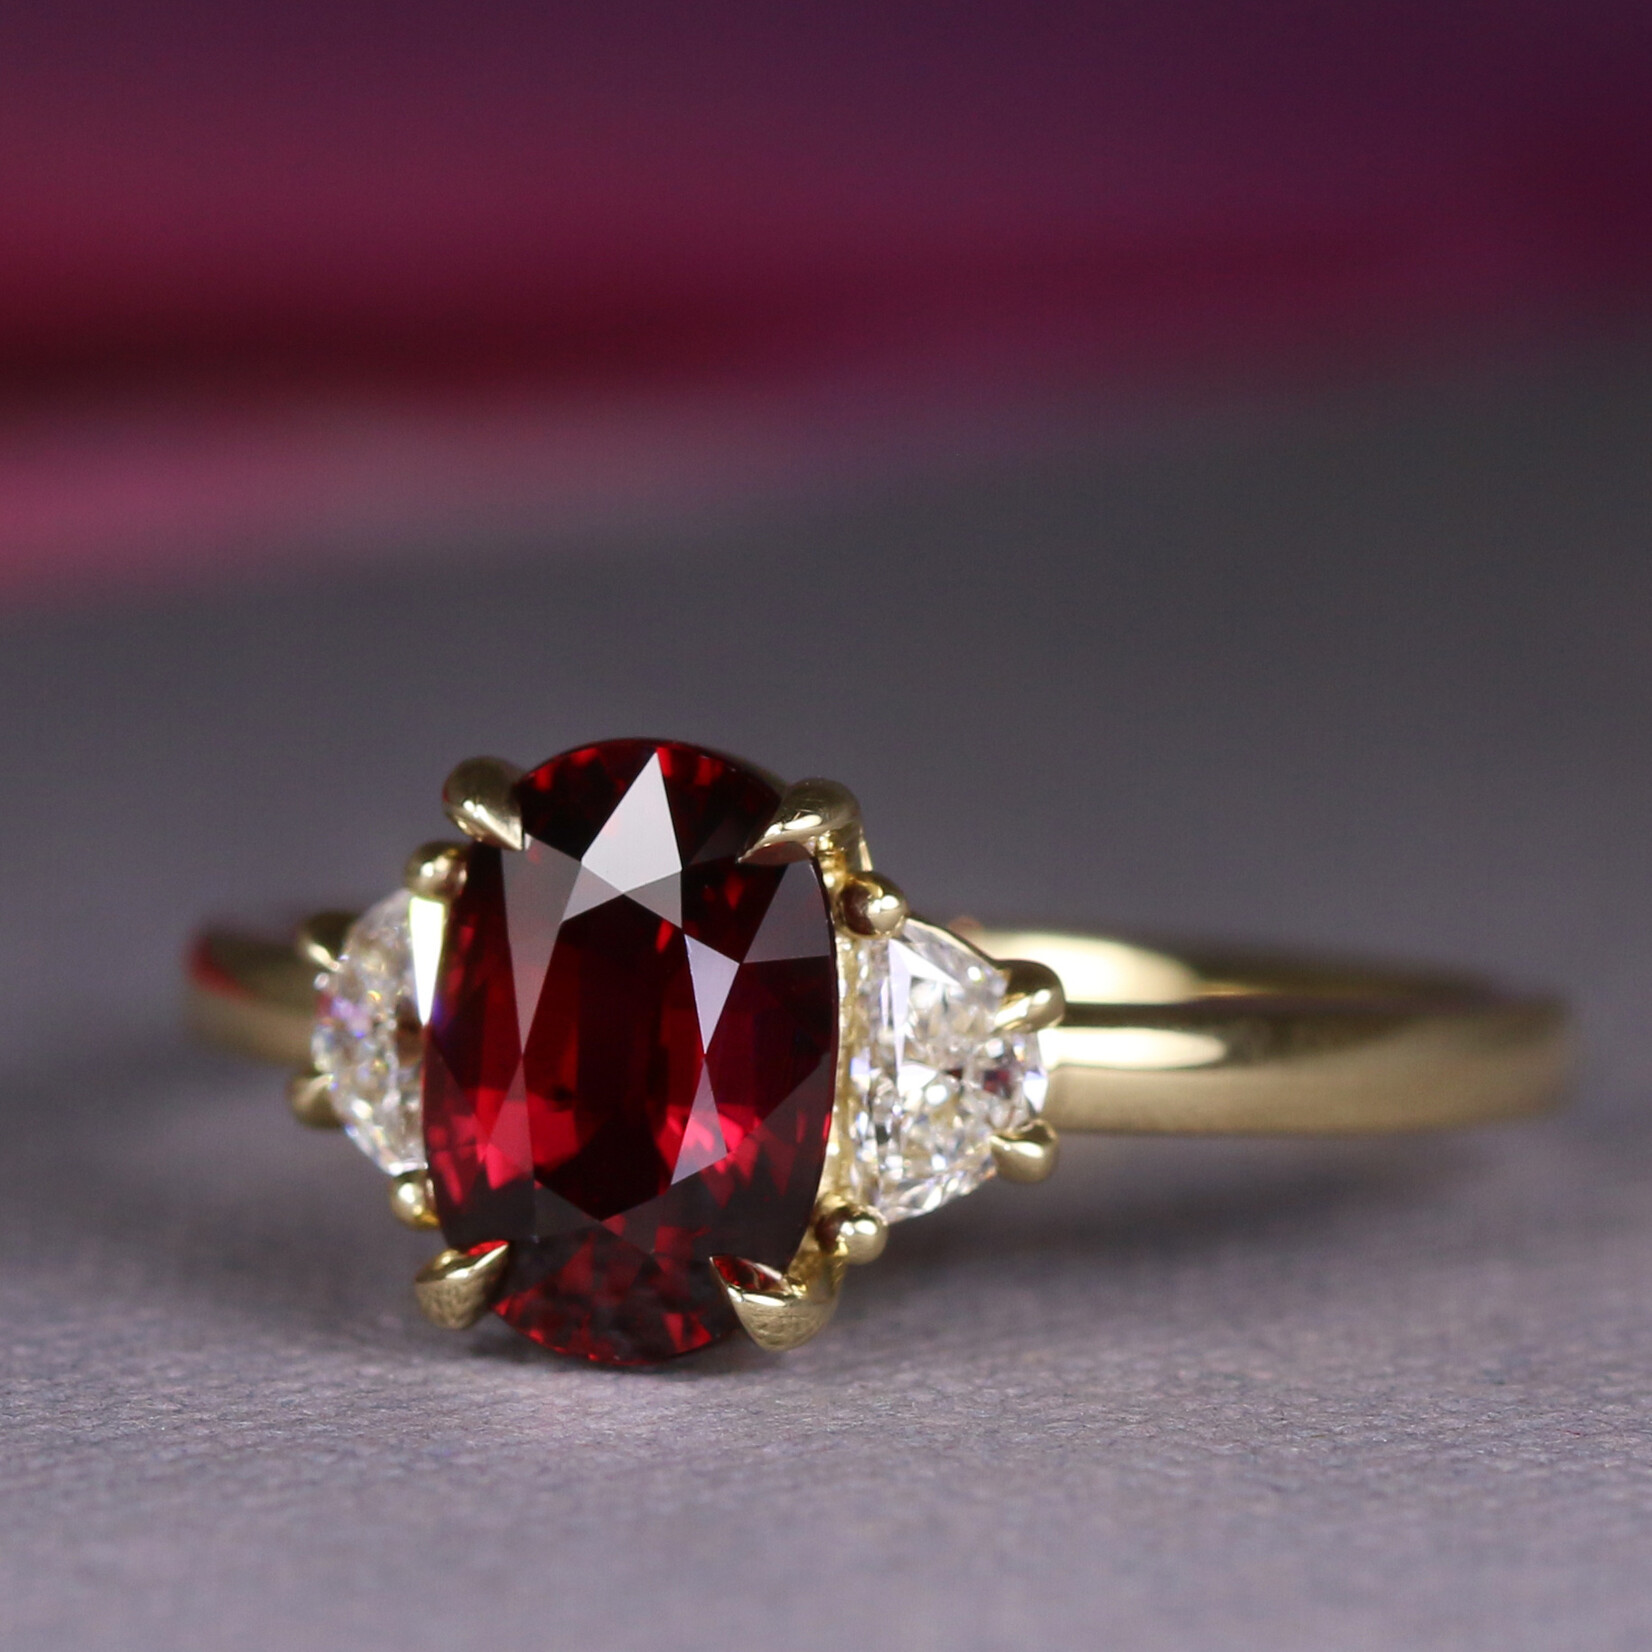 Baxter Moerman Penelope Ring with Ruby and Diamonds